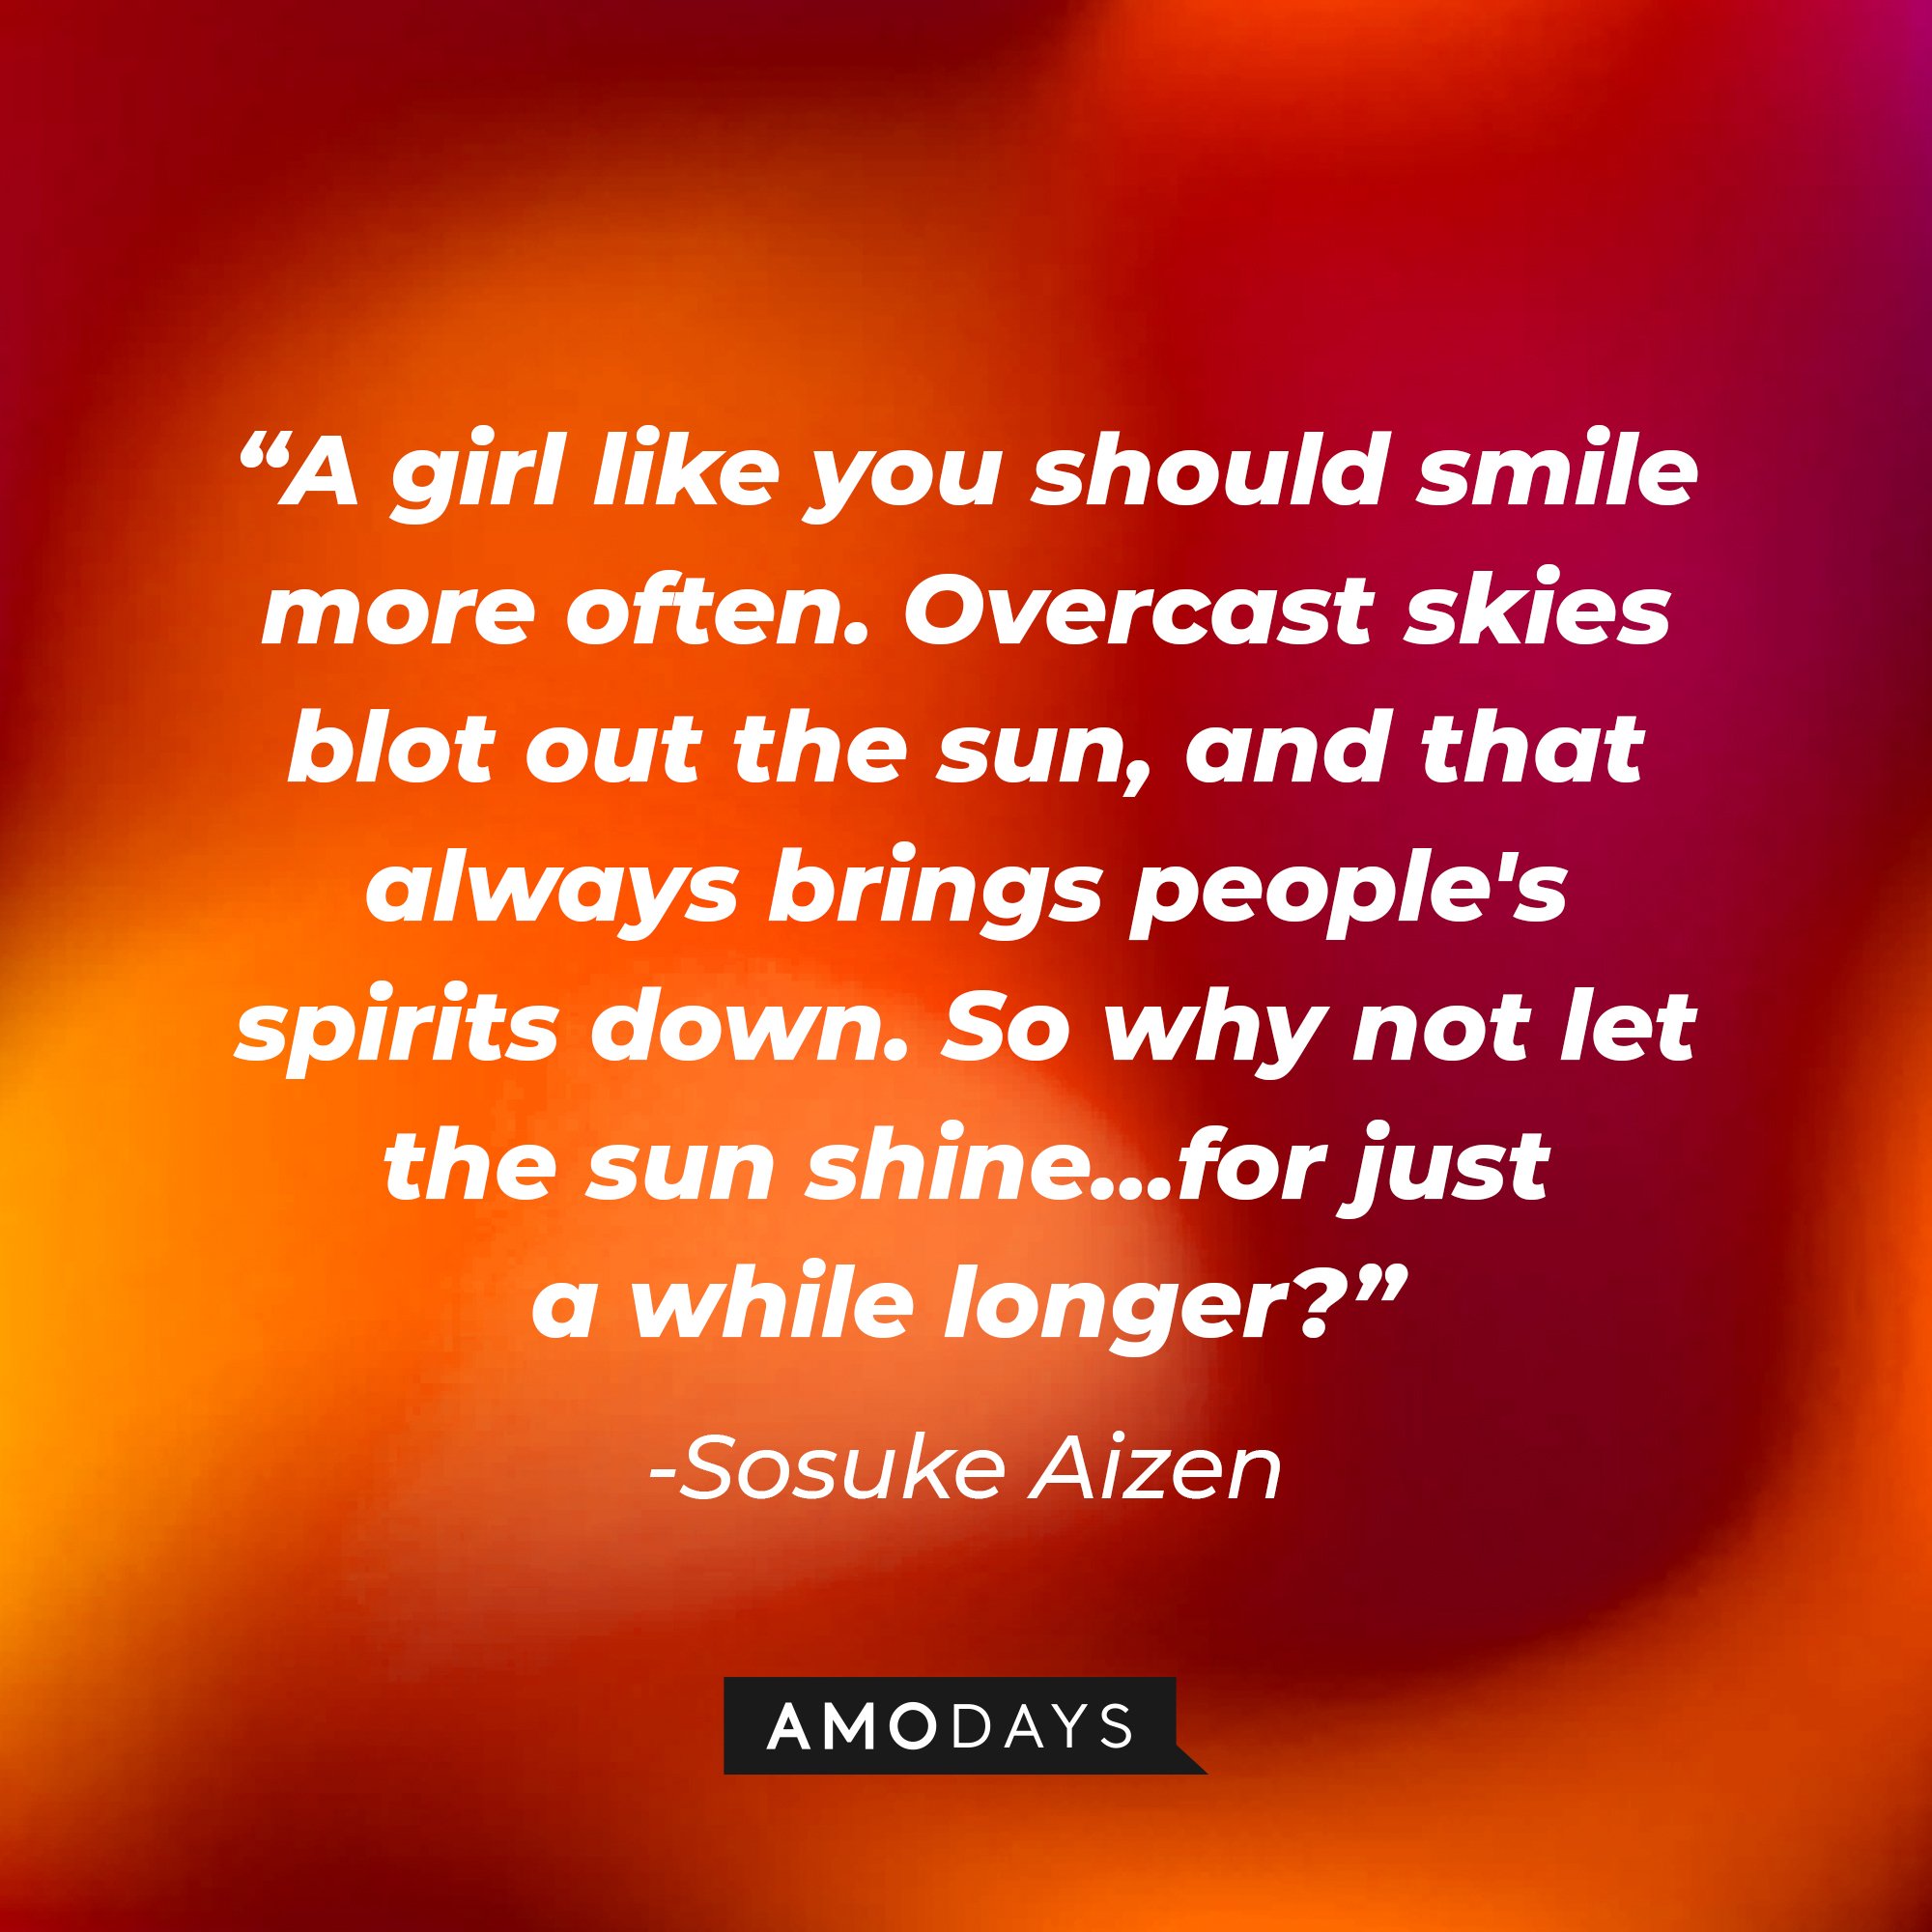 Sosuke Aizen's quote: "A girl like you should smile more often. Overcast skies blot out the sun, and that always brings people's spirits down. So why not let the sun shine…for just a while longer?" | Image: AmoDays